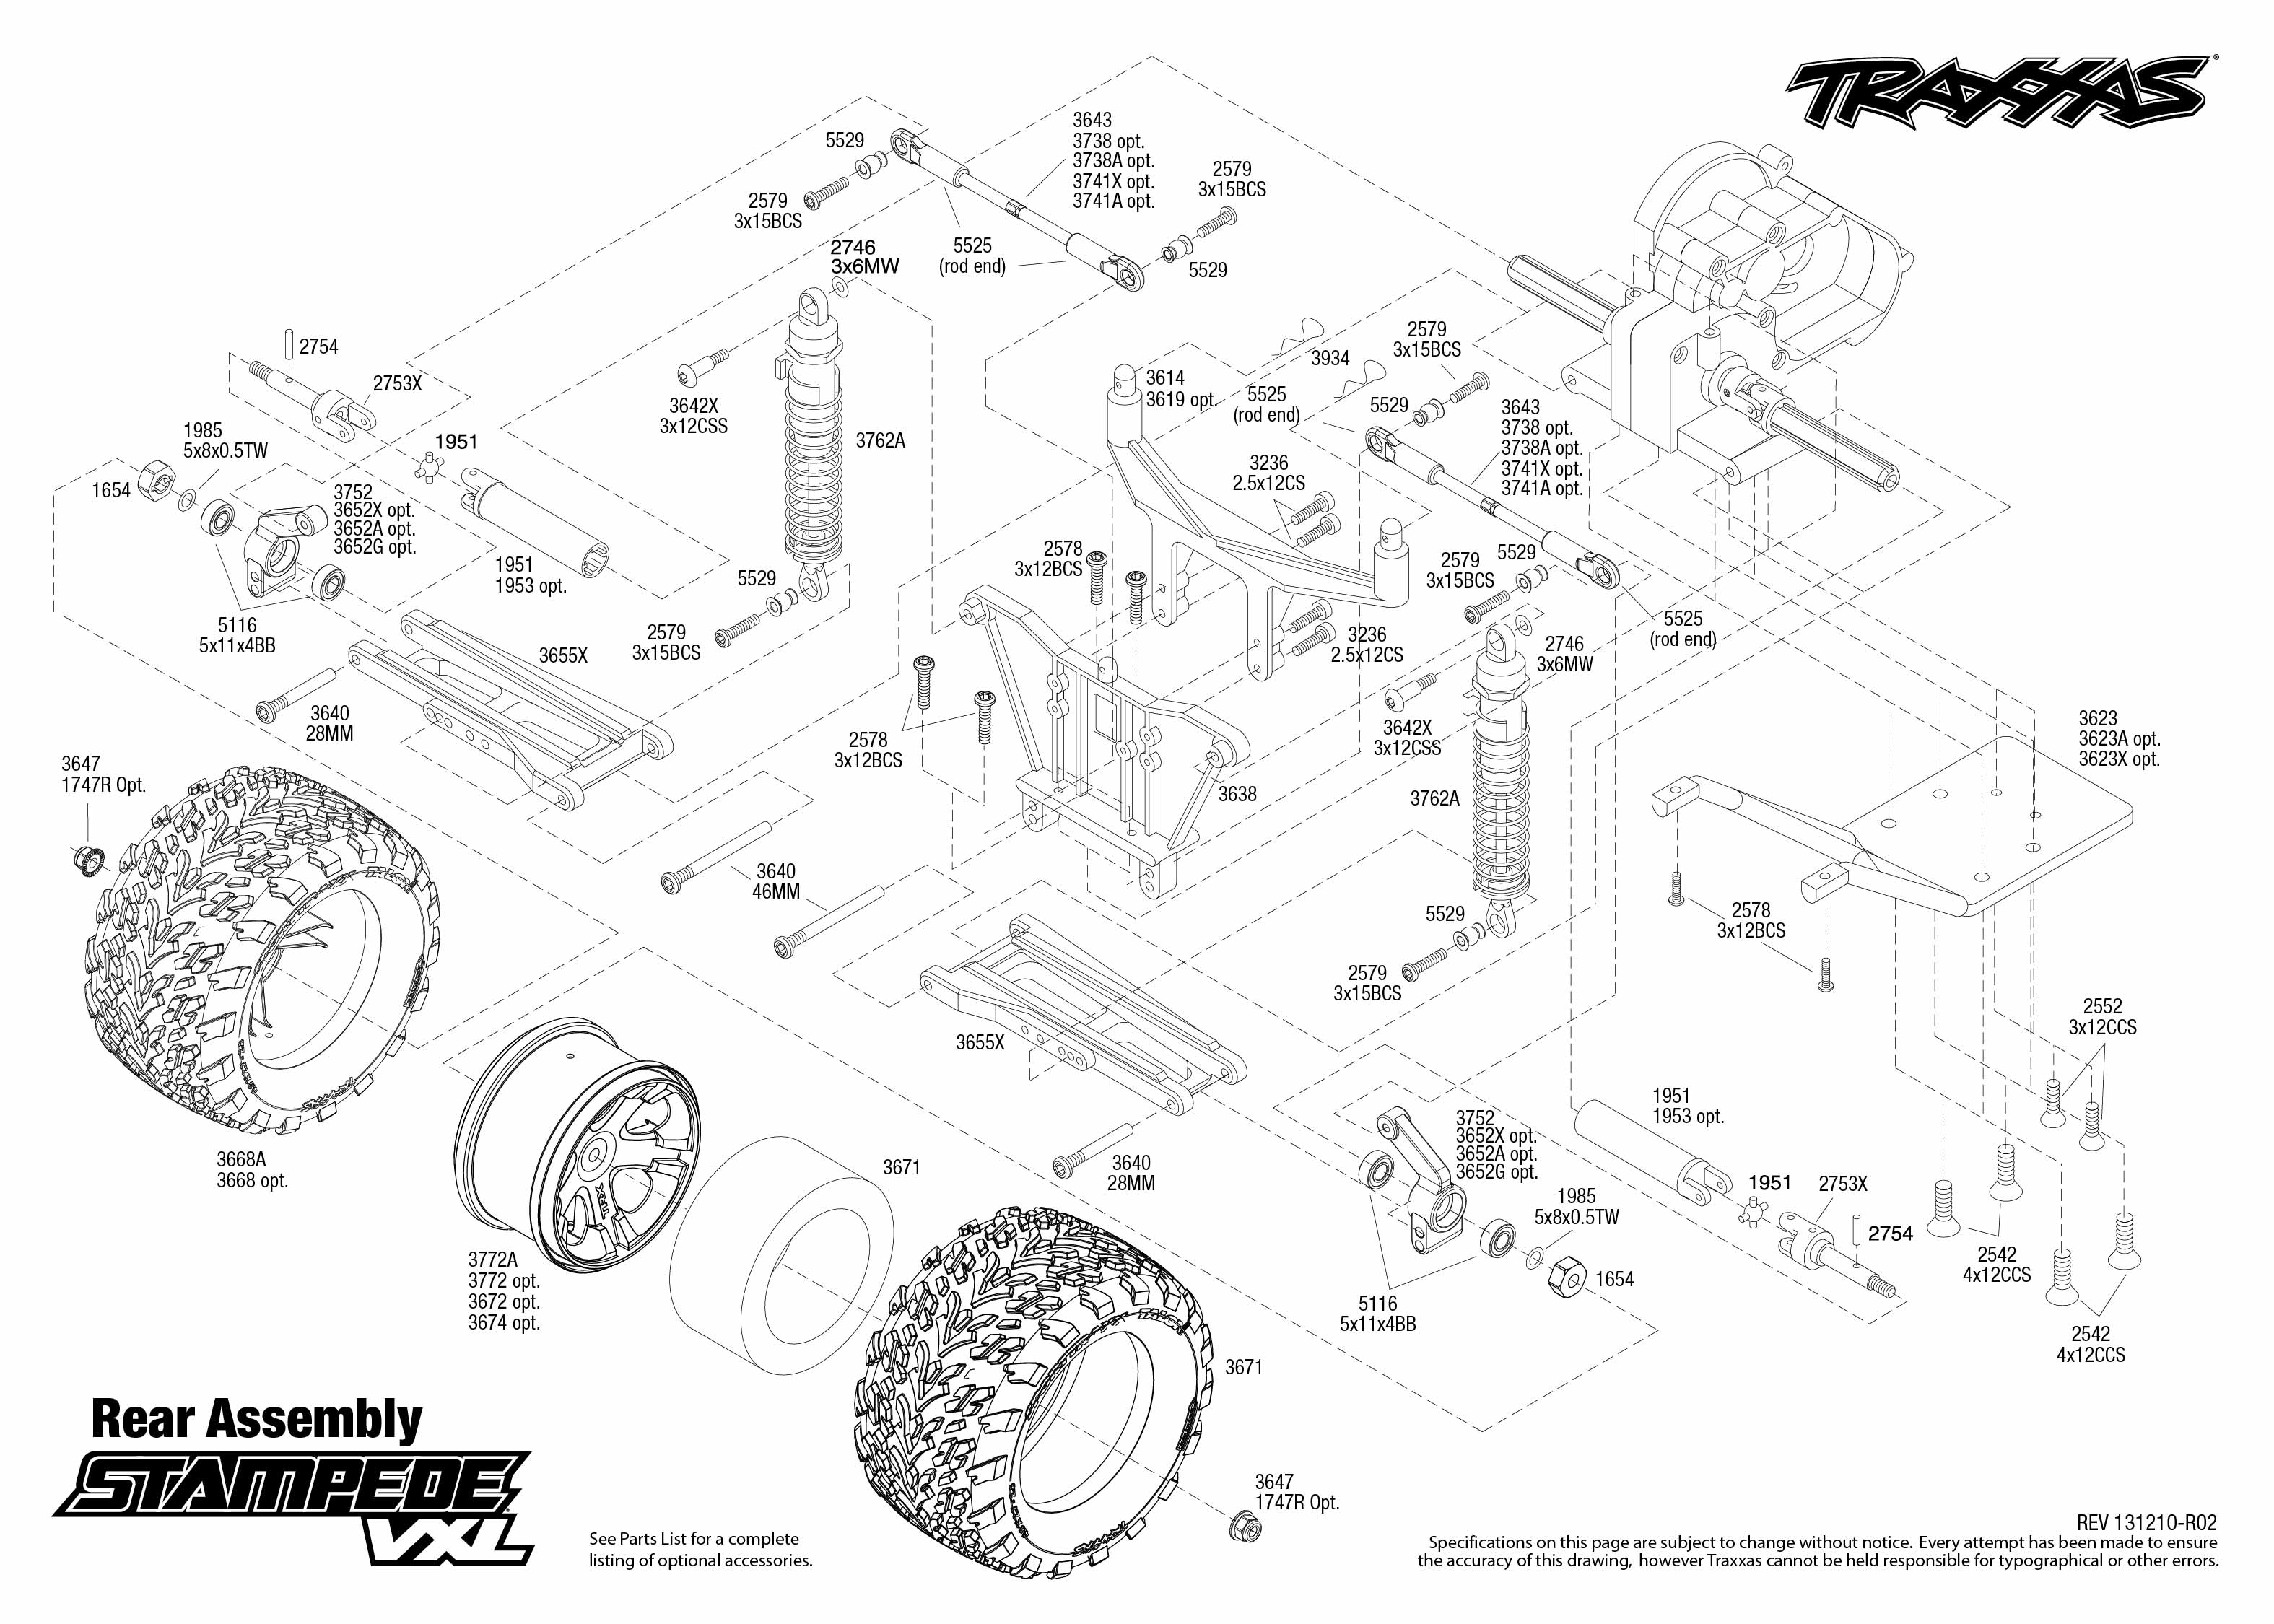 Traxxas - Stampede VXL - Exploded Views - Page 3